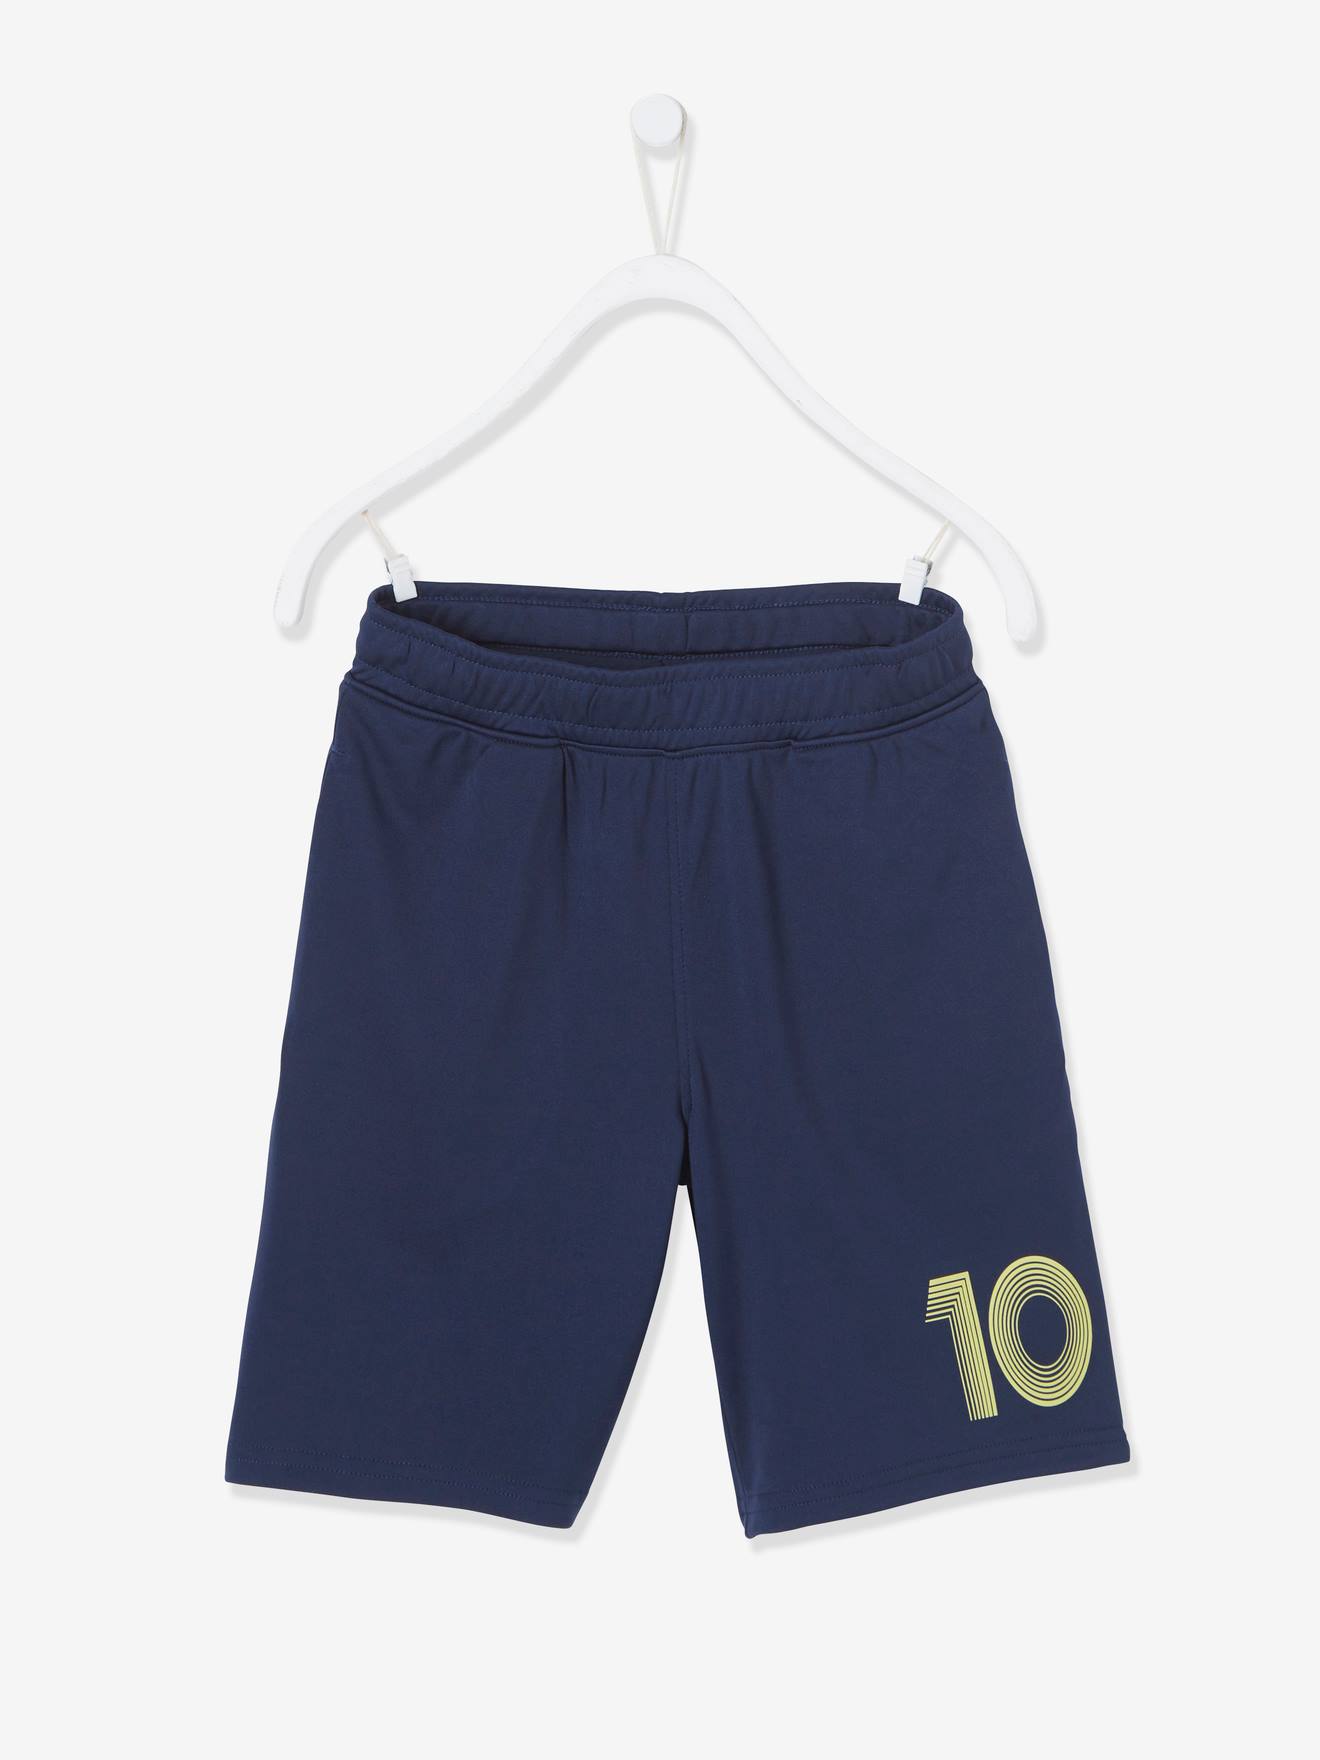 Number 10 Sports Shorts in Techno Material for Boys blue